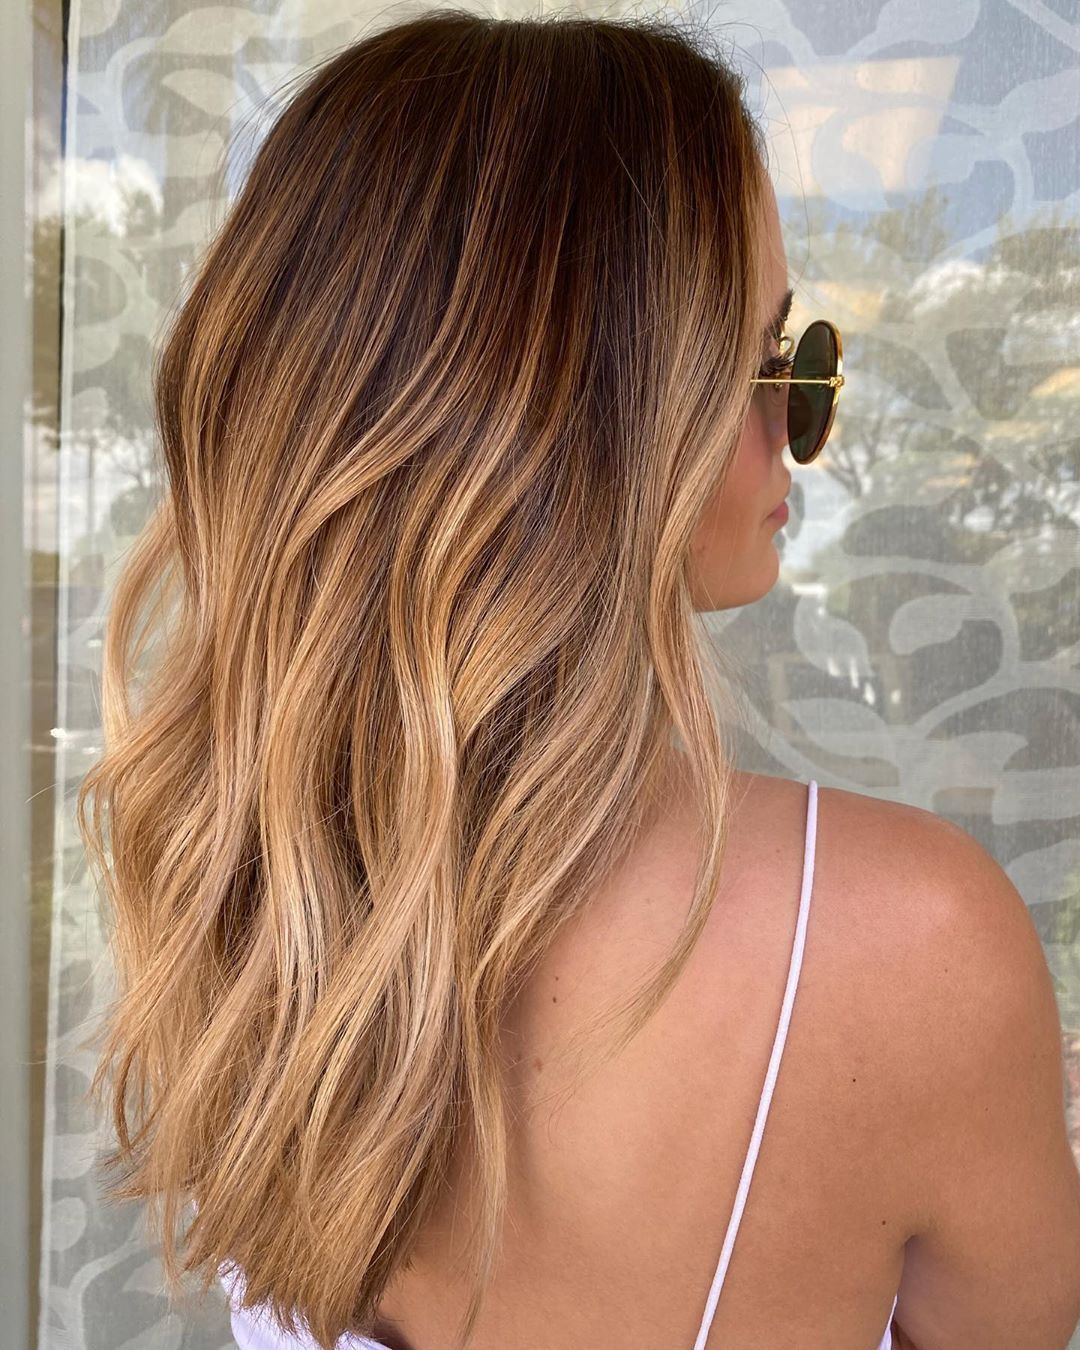 Mallery Share's Instagram profile post: “Brunette with a honey blonde balayage. Perfect balance of warm and neutral tones рџ?Ћв?ЂпёЏ SUN-KISSED” -   18 hair Brunette honey ideas